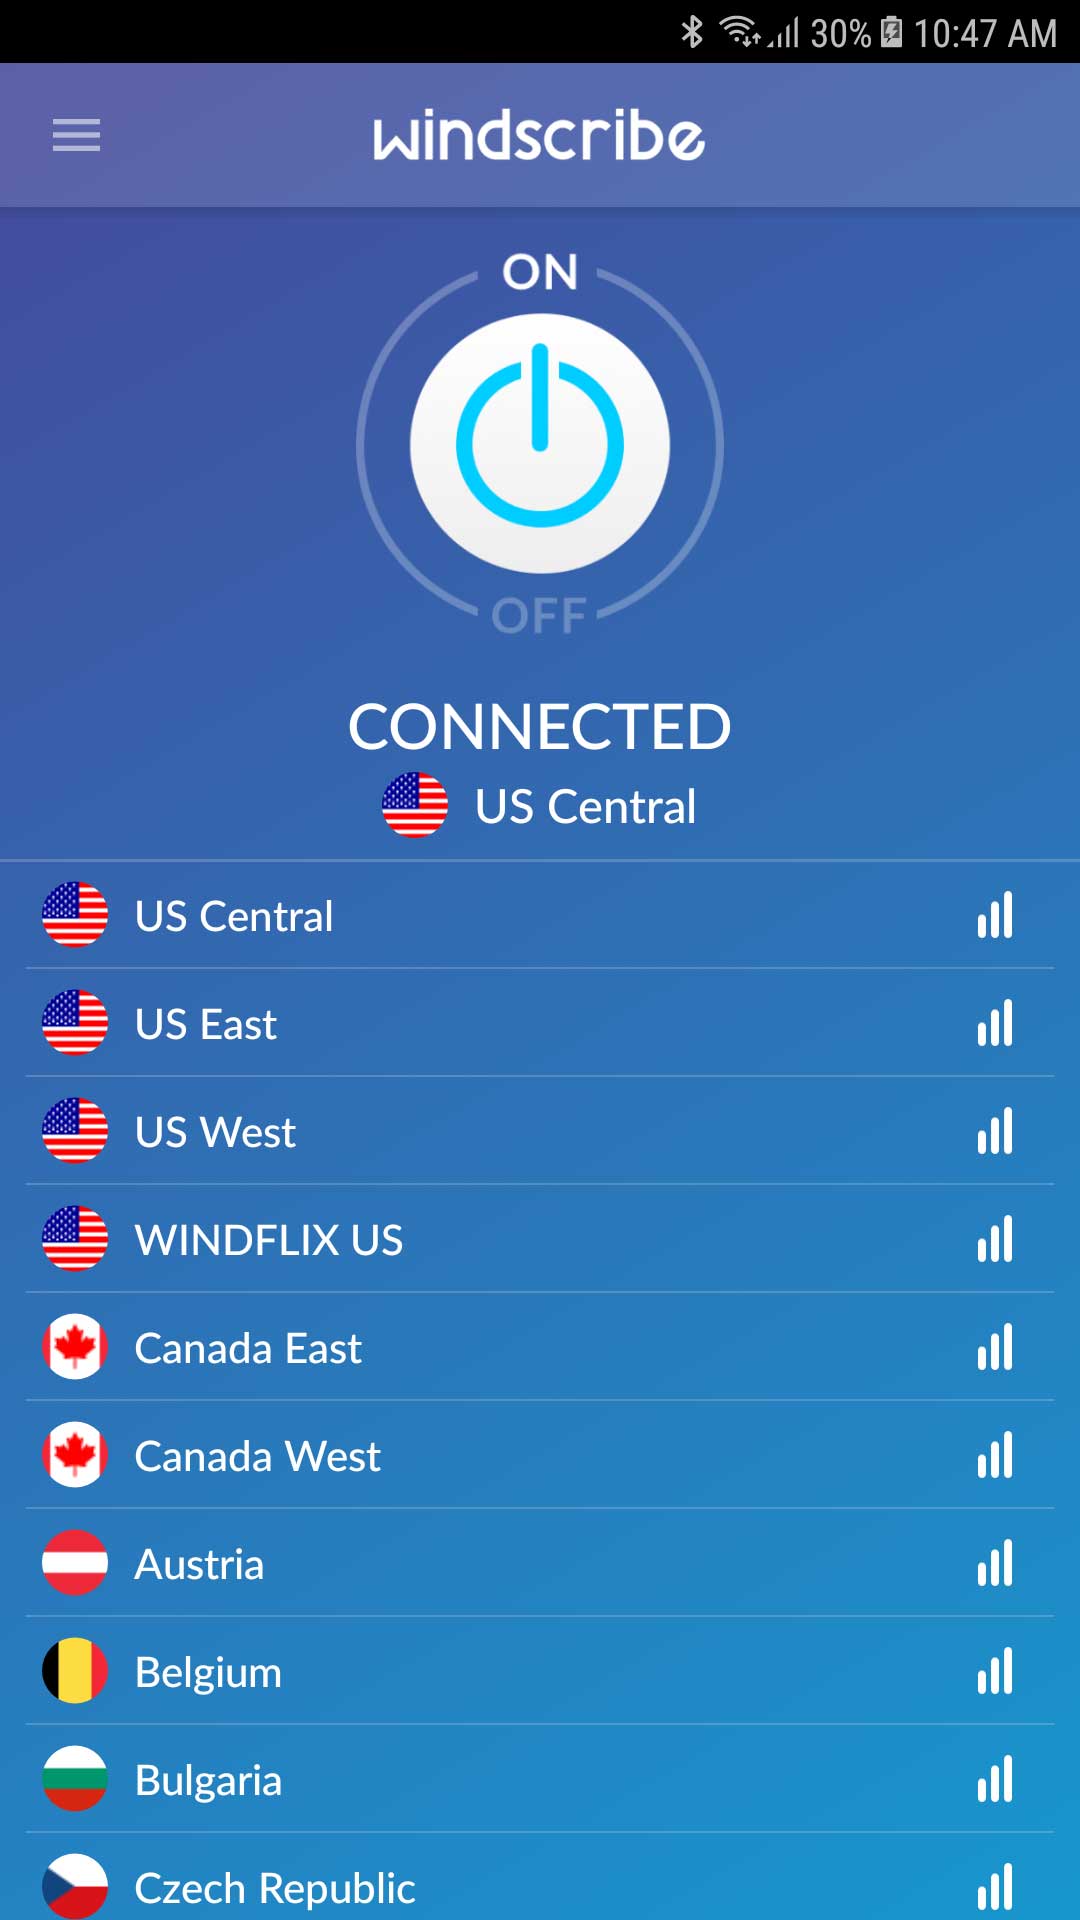 Vpn - IP-VPNサービス内容｜OPTAGE for Business : A virtual private network (vpn) provides privacy, anonymity and security to users by creating a private network connection across a public network connection.